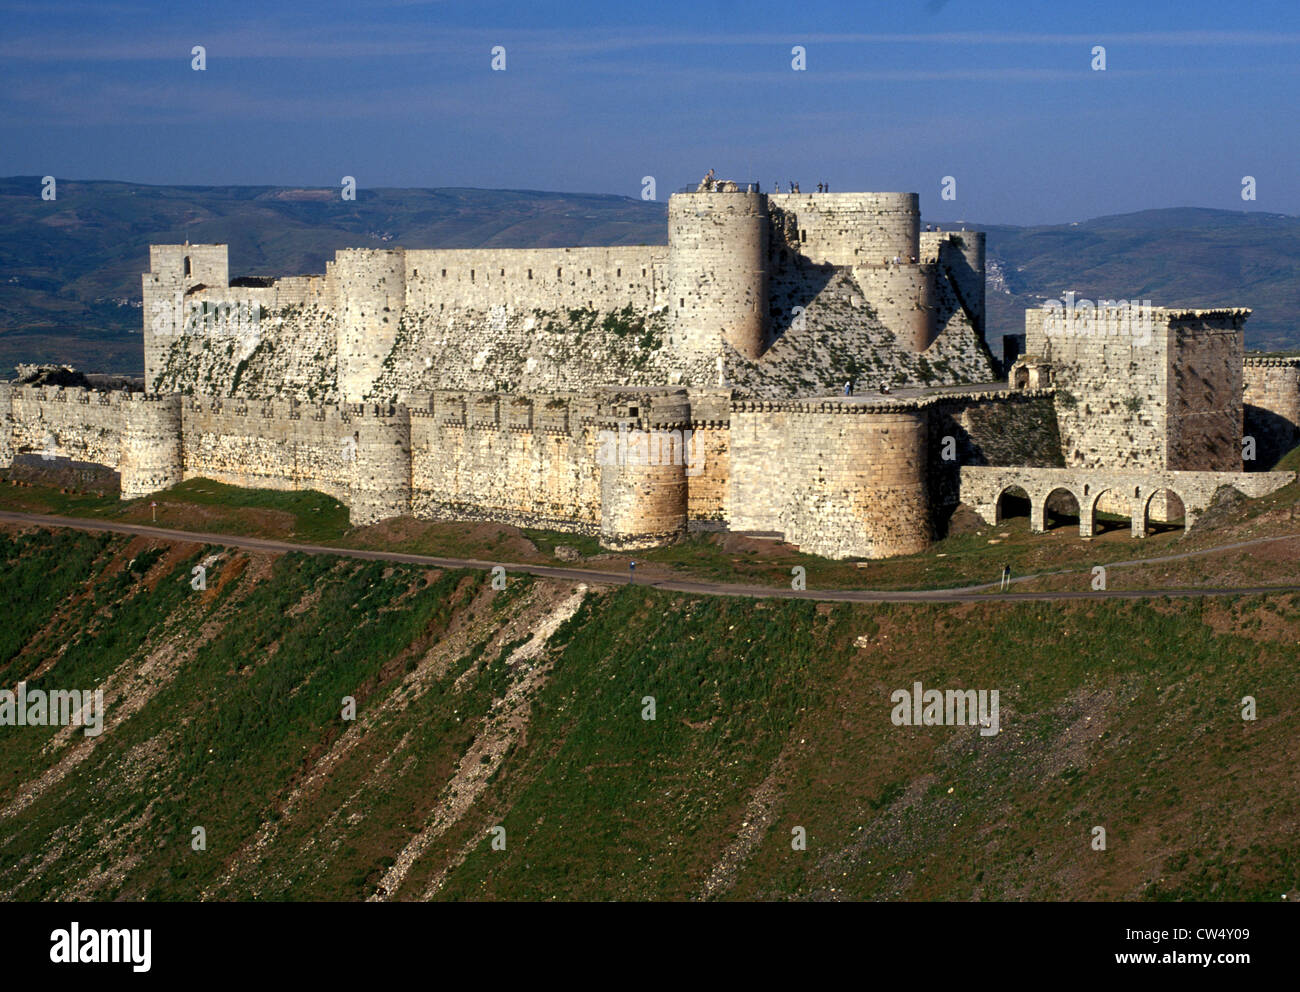 Krak des Chevaliers, Crusader fortress in Syria Stock Photo